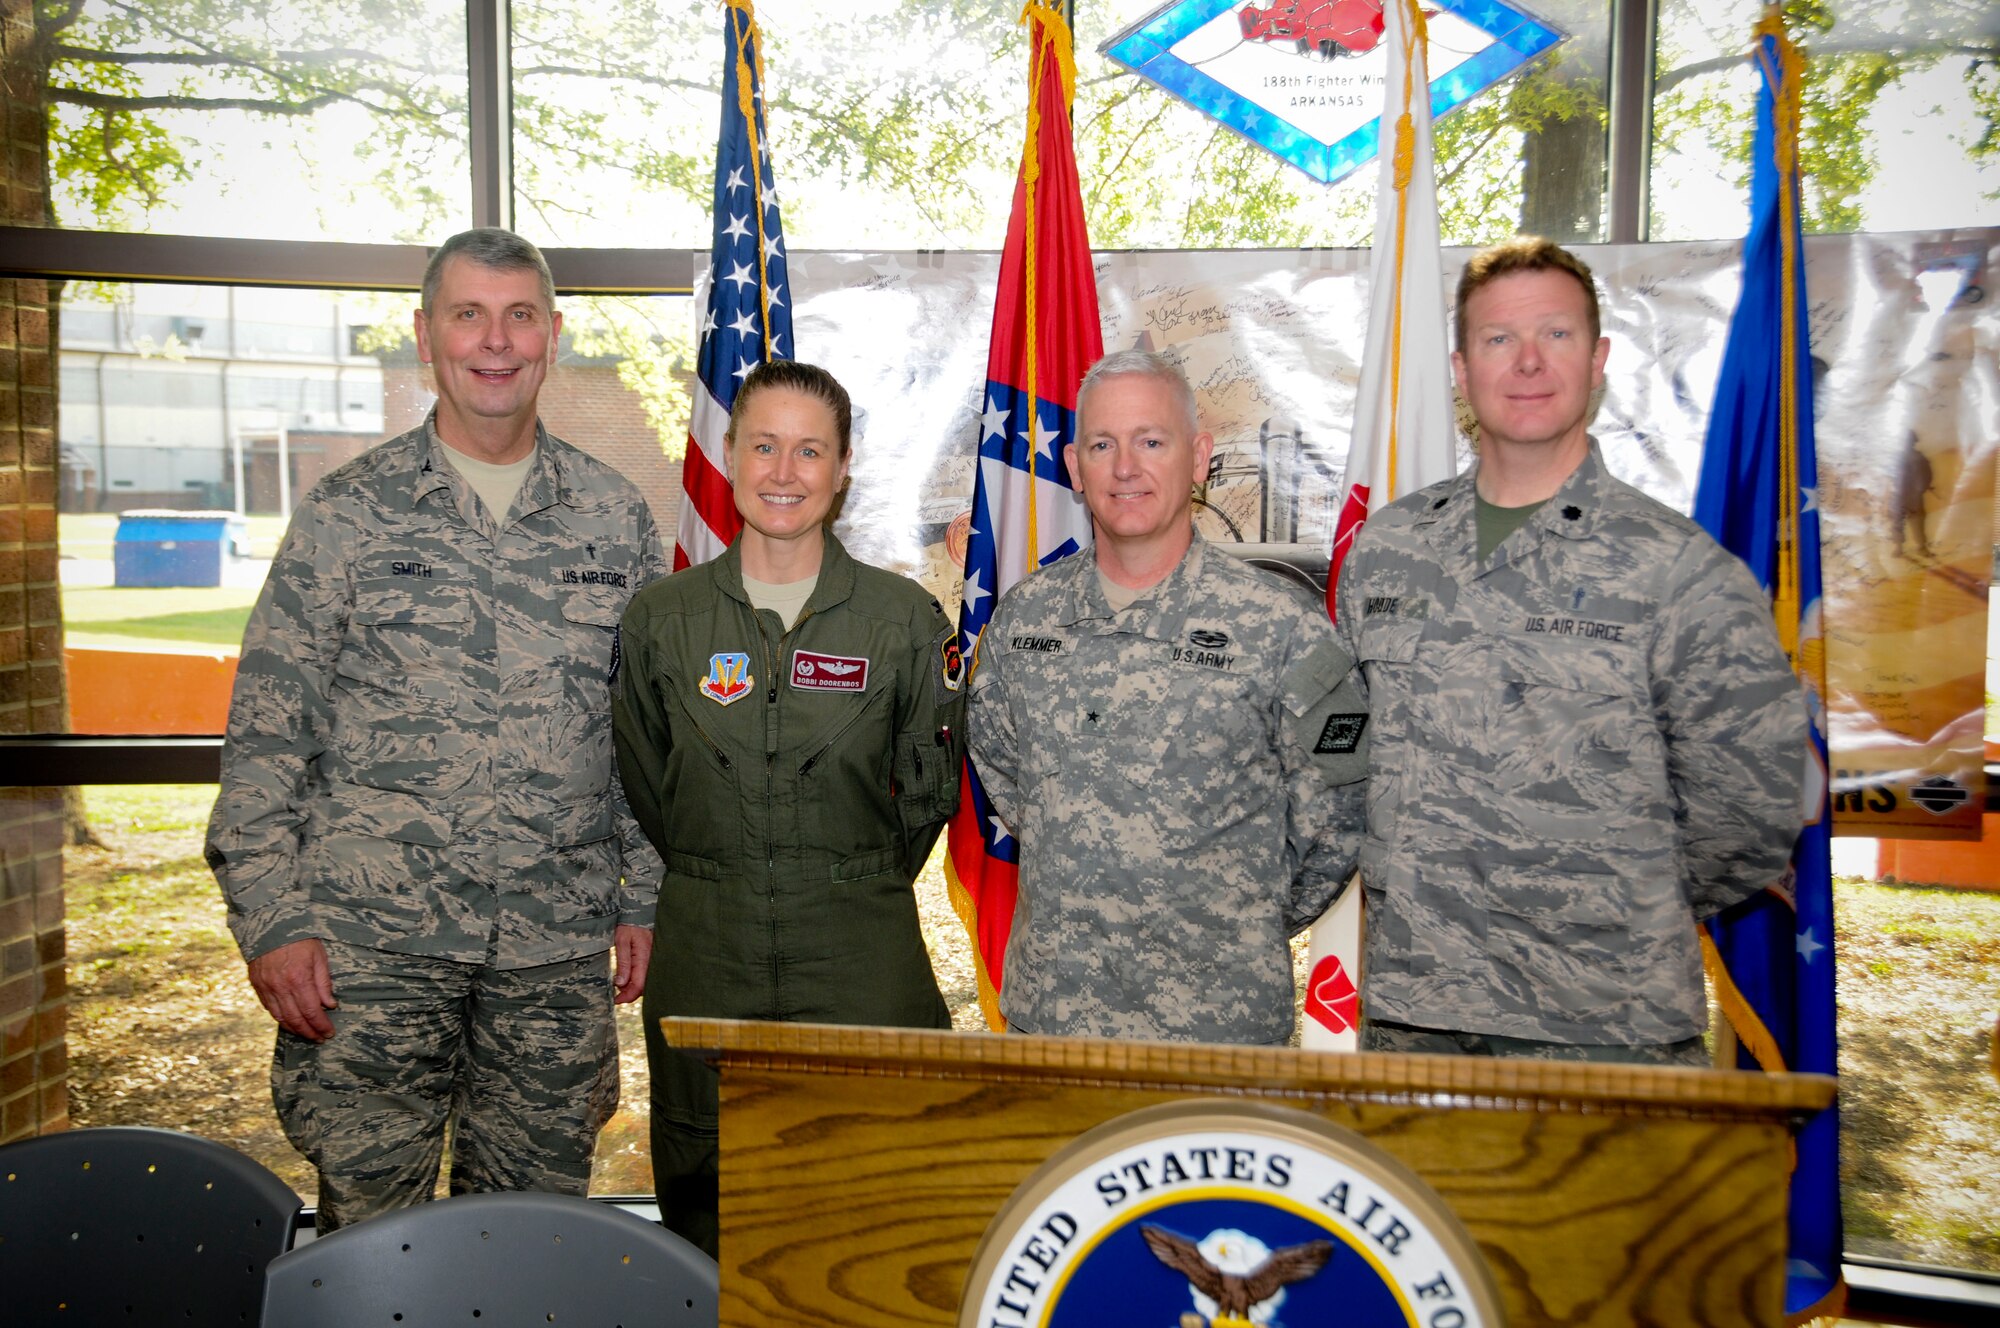 From left, Col. Tom Smith, Col. Bobbi Doorenbos, Brig. Gen. Keith Klemmer and Lt. Col. Herb Hodde pose for a photo during a prayer breakfast held May 3, 2015 at Ebbing Air National Guard Base, Fort Smith, Ark. Smith is the Joint Force Headquarters Command chaplain, Doorenbos is the 188th Wing commander, Klemmer is the Arkansas deputy adjutant general and Hodde is a chaplain for the 188th. The breakfast was hosted by the 188th Chaplain's office to support the Airmen in their spiritual beliefs. (U.S. Air National Guard photo by Senior Airman Cody Martin/released)